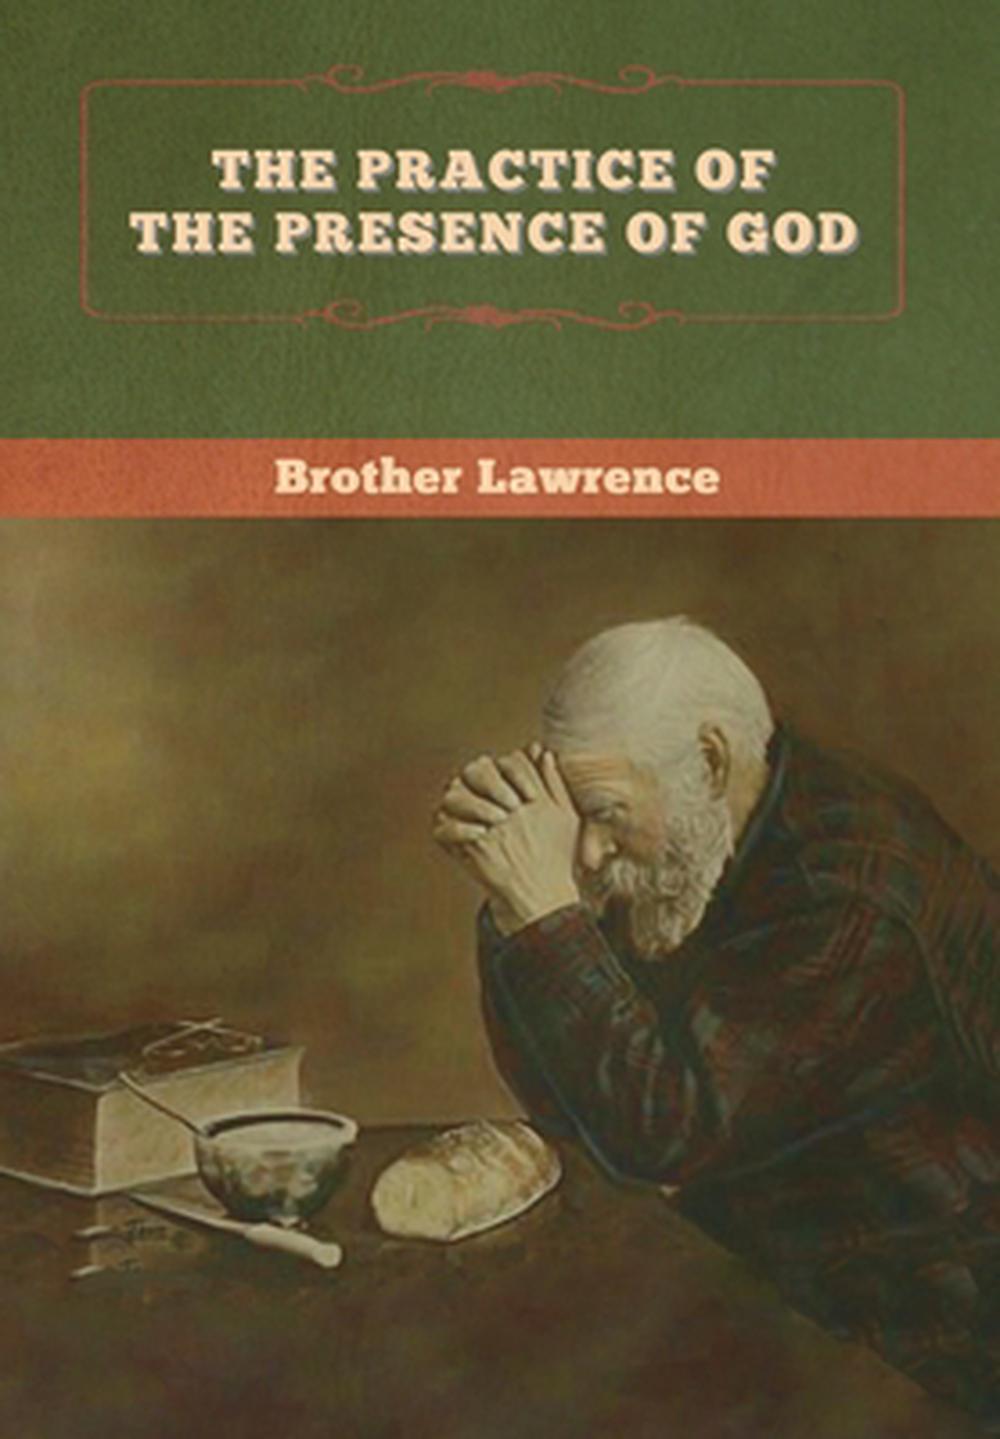 practicing the presence of god